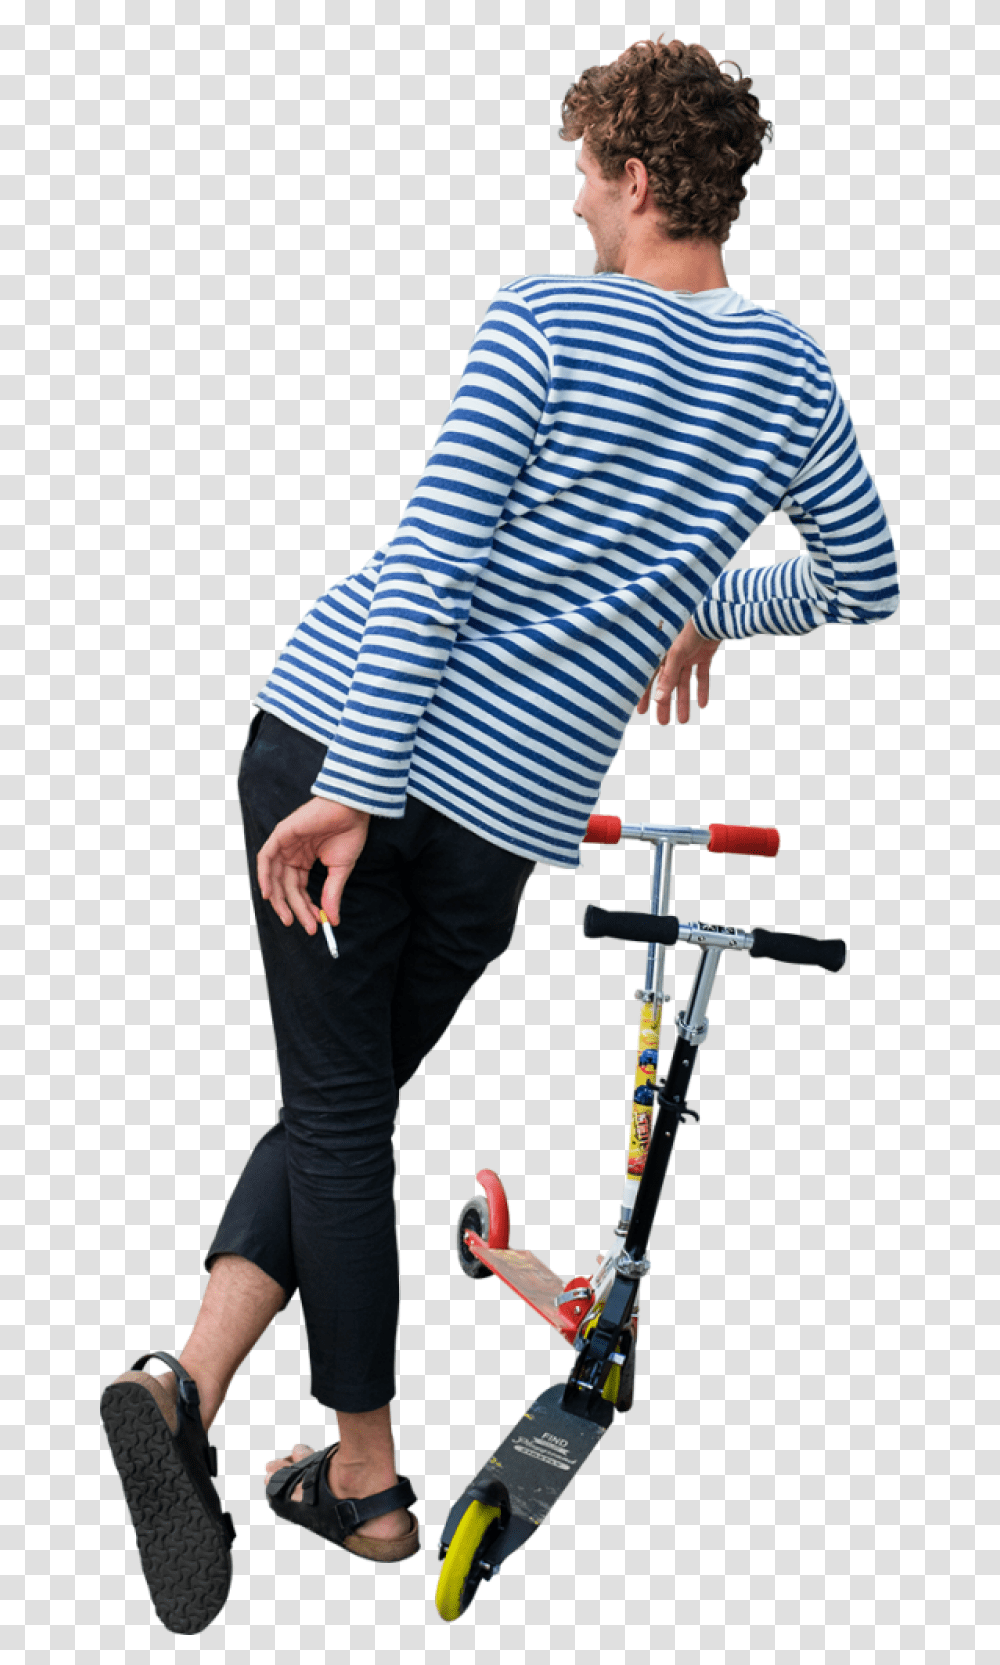 Leaning And Smoking Image Purepng Free People Leaning, Person, Human, Vehicle, Transportation Transparent Png